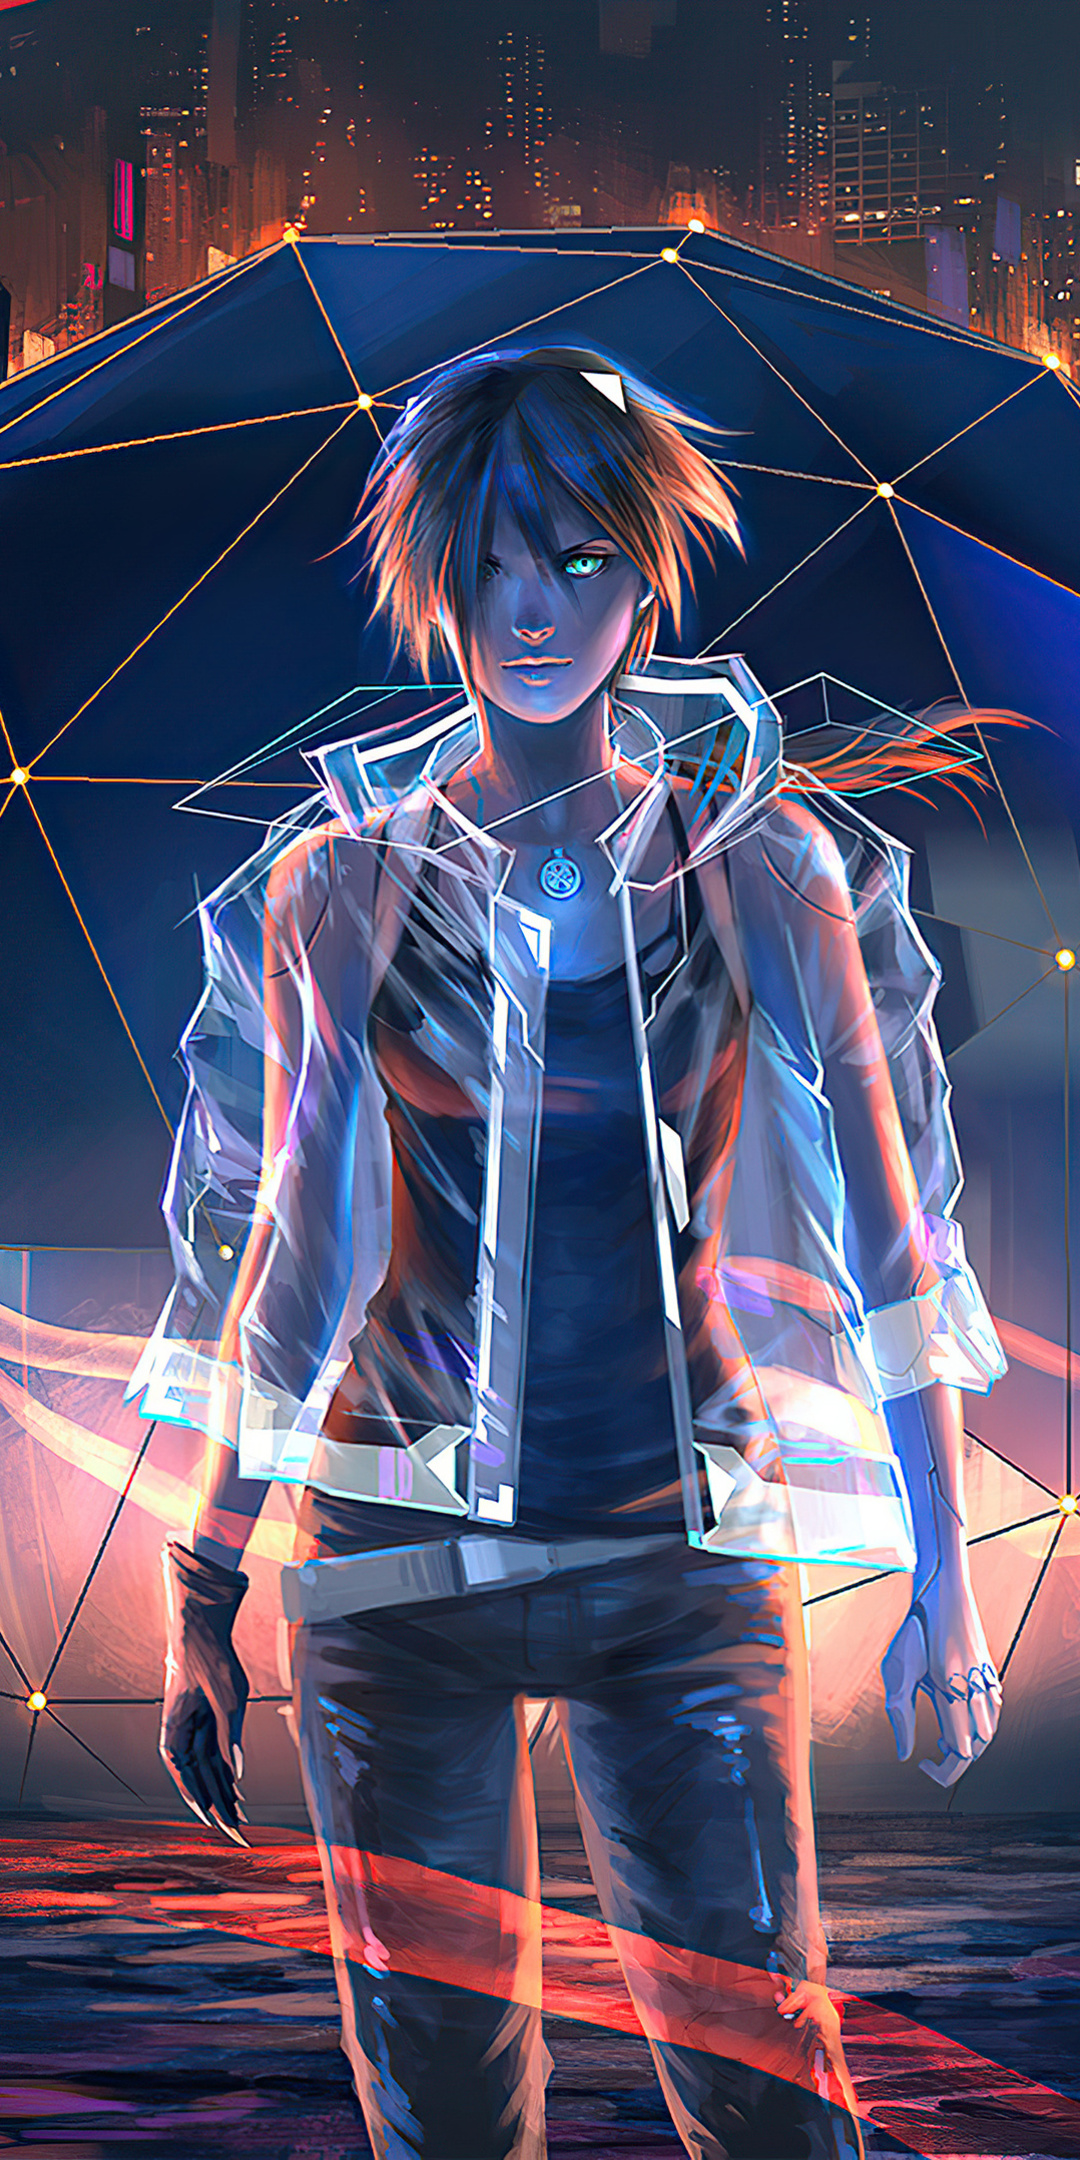 1080x2160 Night City Anime Boy 4k One Plus 5T,Honor 7x,Honor view 10,Lg Q6  HD 4k Wallpapers, Images, Backgrounds, Photos and Pictures